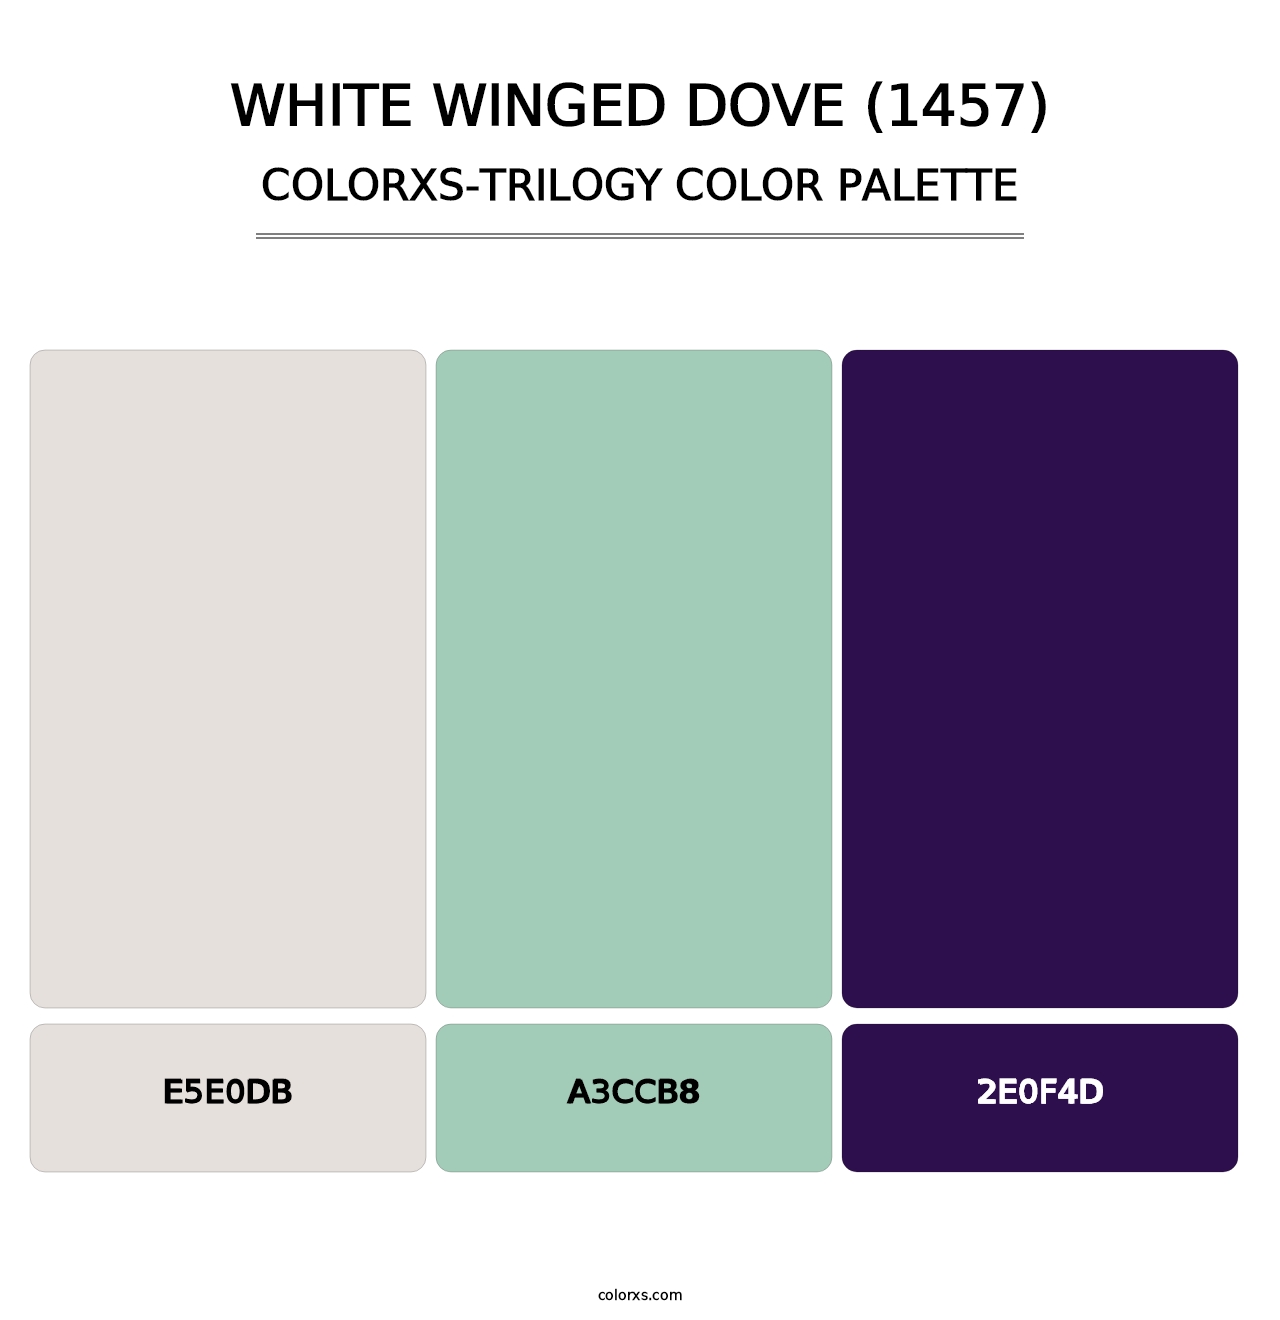 White Winged Dove (1457) - Colorxs Trilogy Palette